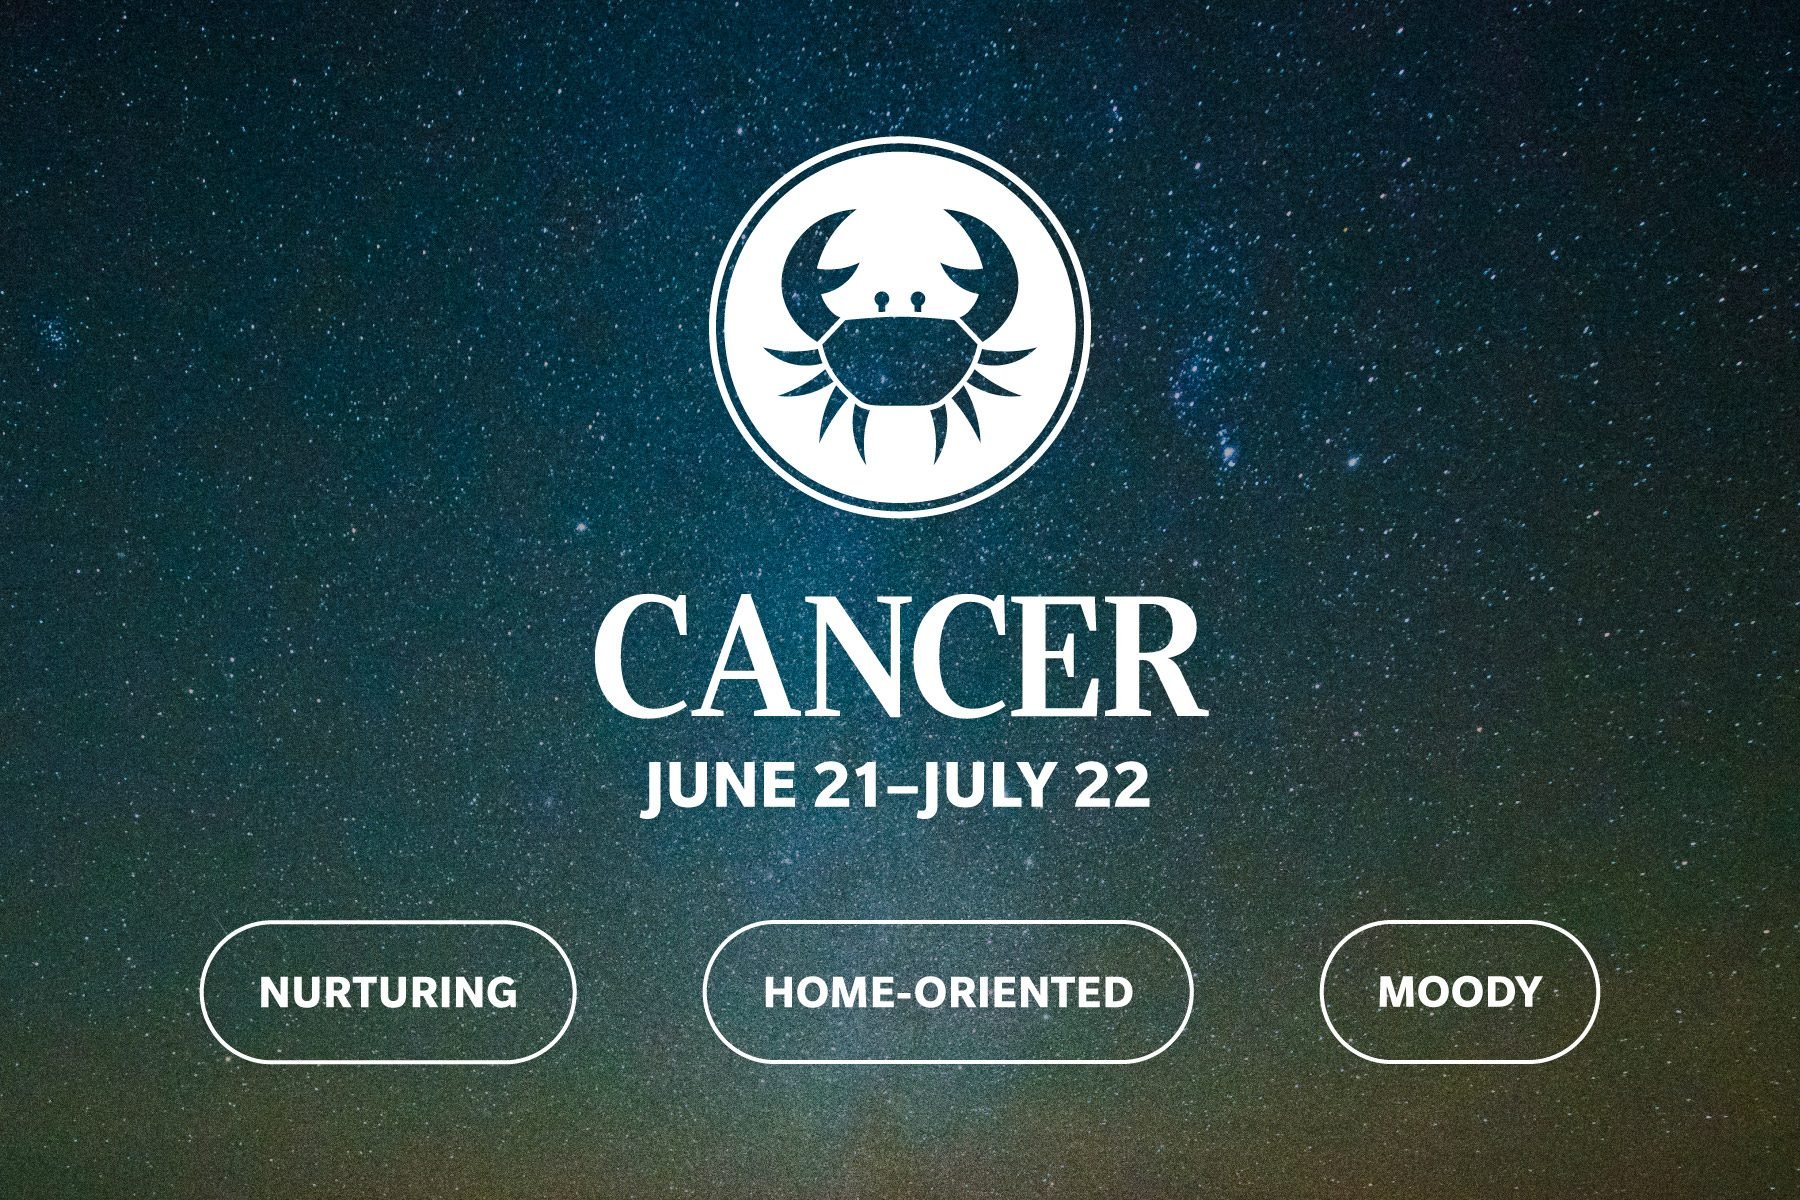 Zodiac sign qualities on galaxy background cancer